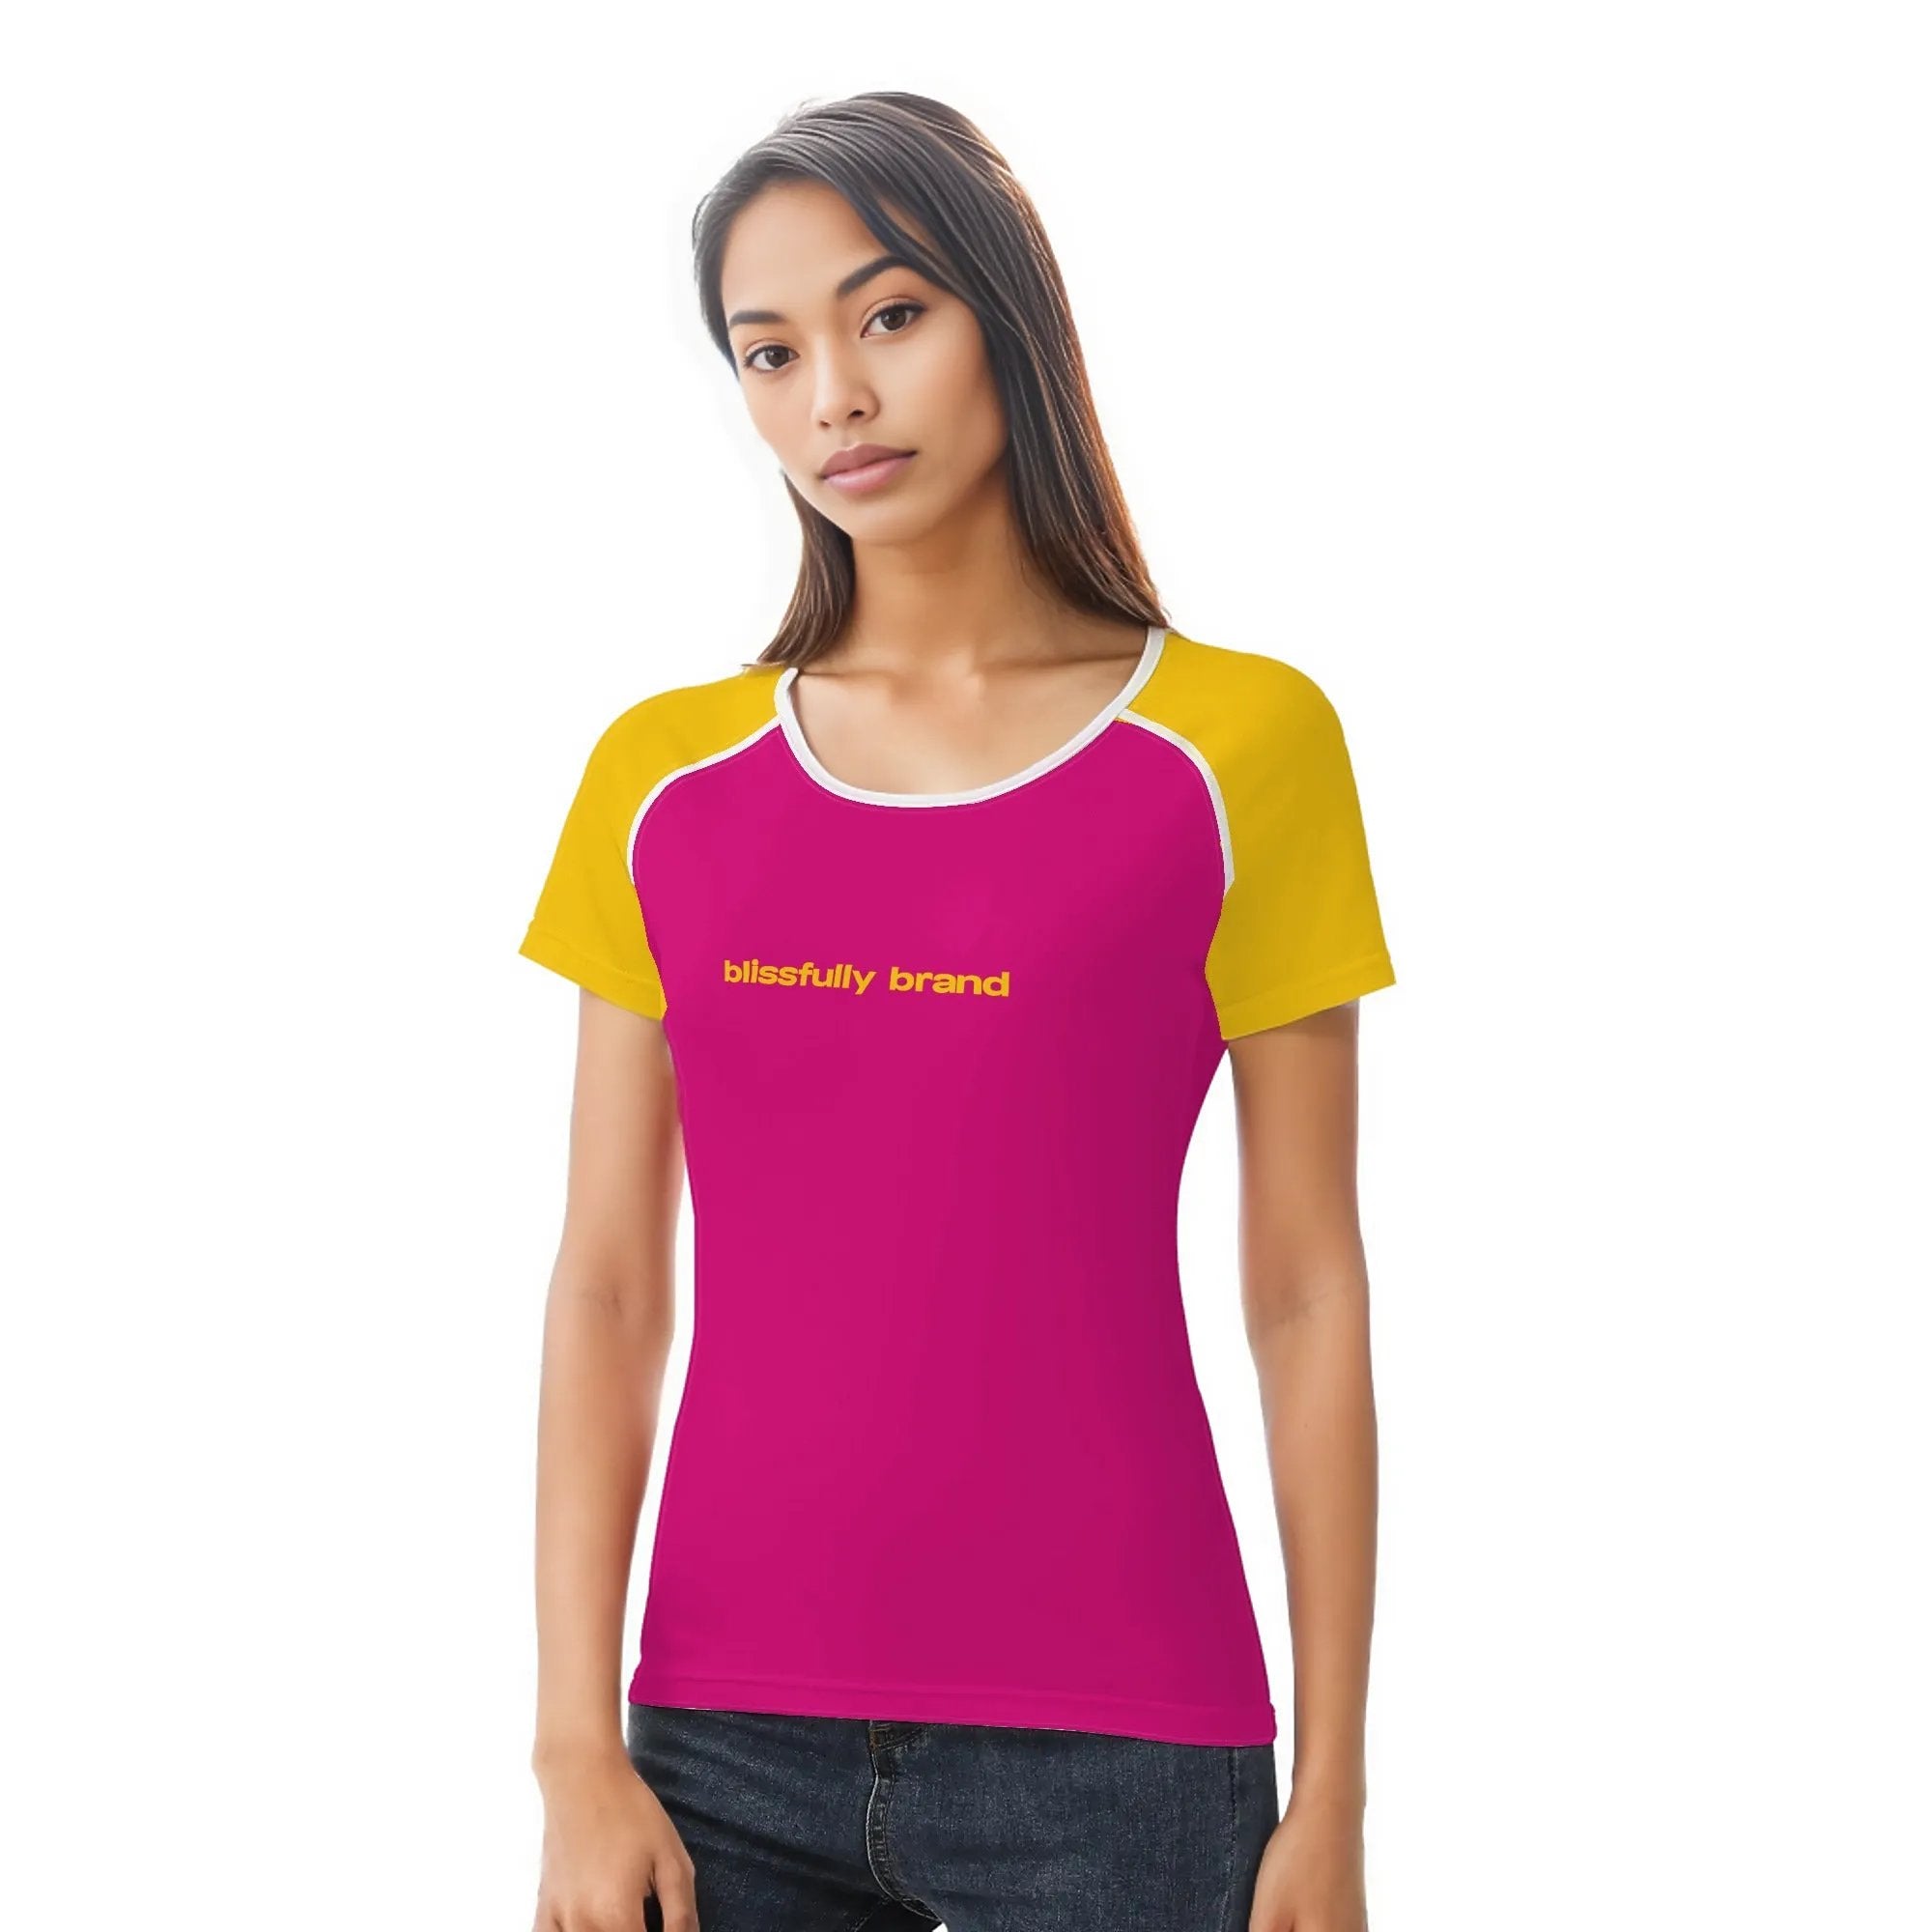 Airline Series Pink Yellow Color Block Crewneck Stretchy Logo Tee Streetwear Silky Fitted Chic Hip Bold Contrast Vibrant Statement Summer Casual Blissfully Brand